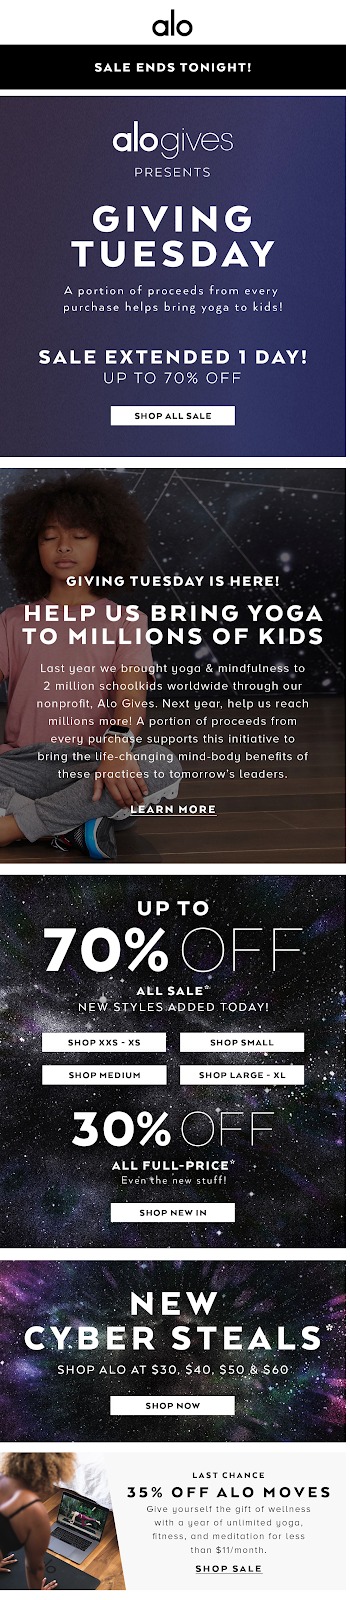 Alo Yoga sends a beautifully branded Giving Tuesday email